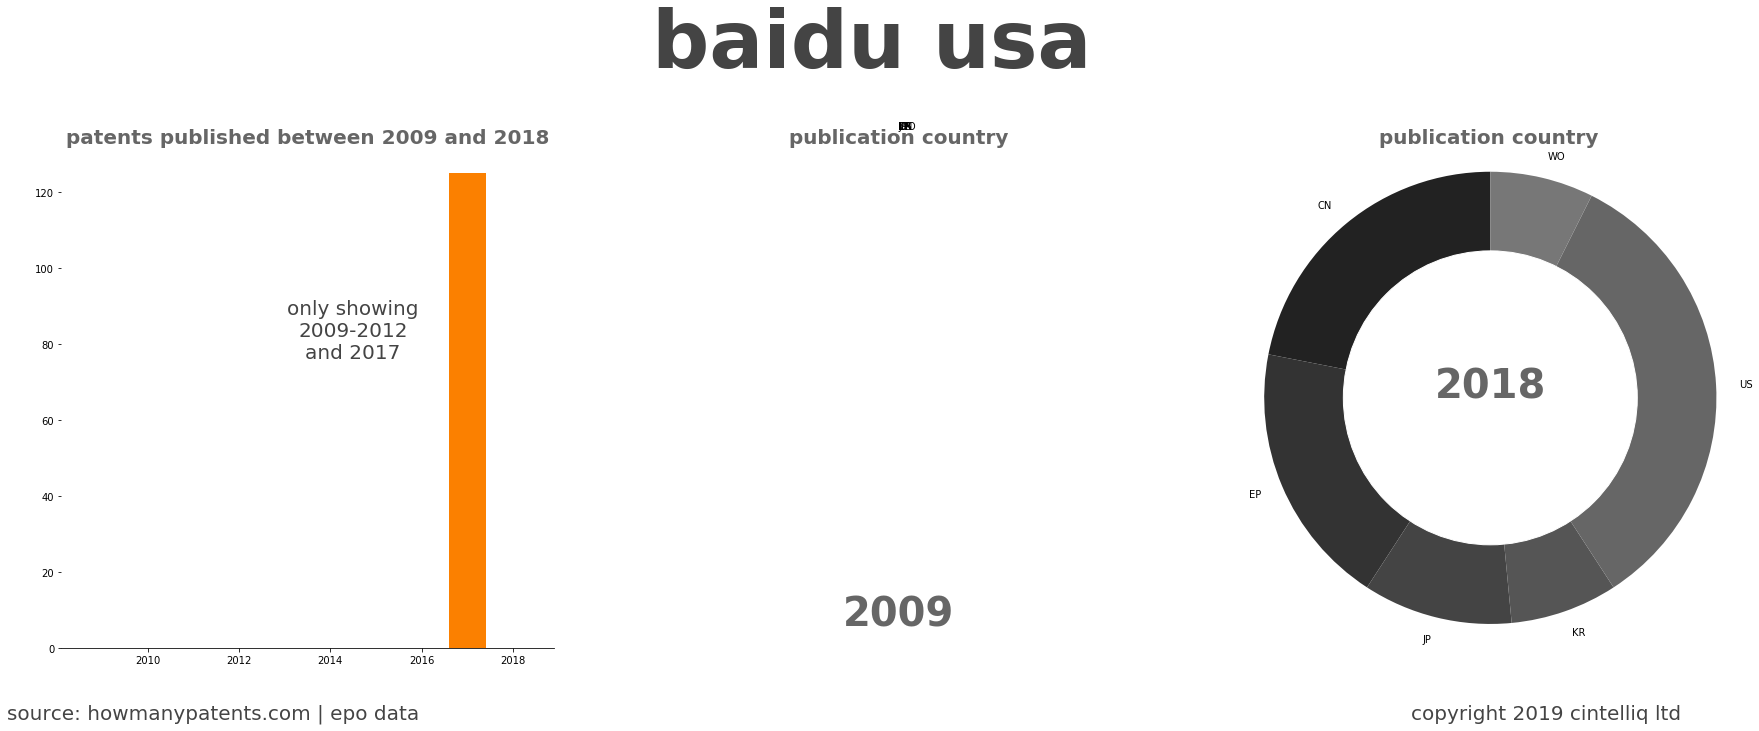 summary of patents for Baidu Usa